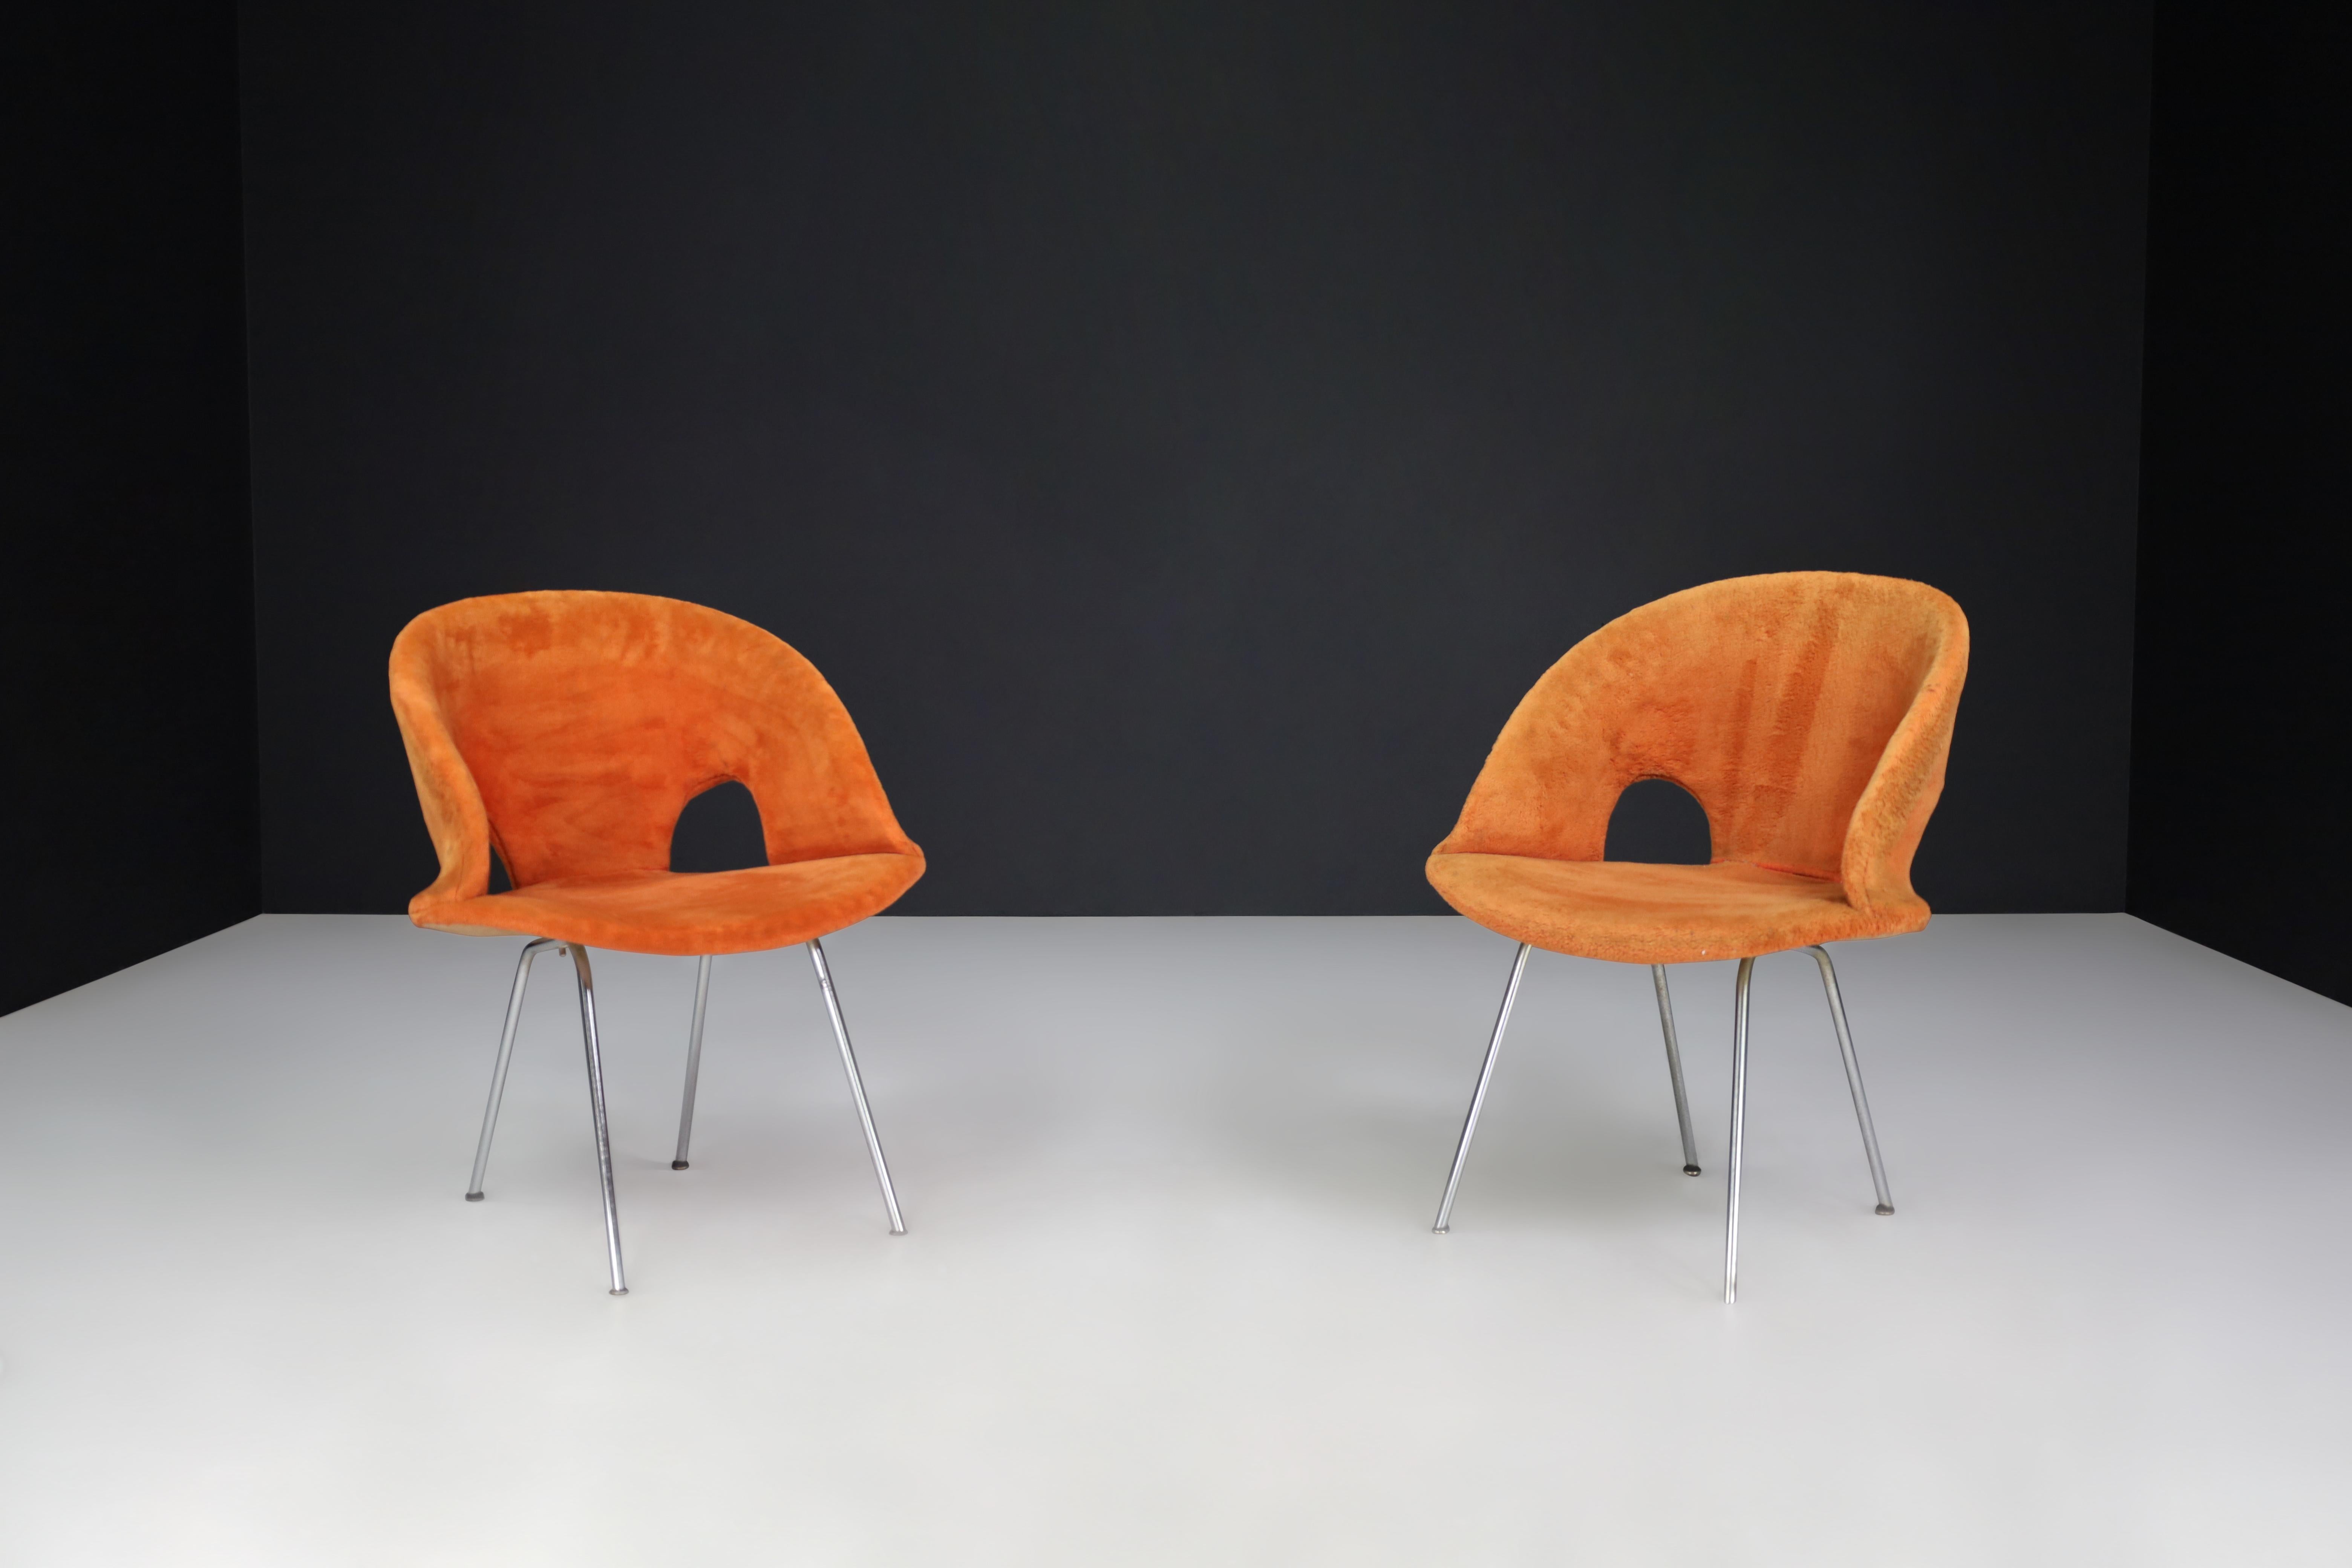 Mid Century Modern Model 350 Chairs By Arno Votteler For Walter Knoll, Germany 1950s 

These are a pair of original model 350 chairs designed by Arno Votteler for Walter Knoll. They are rare and in their original shape, but we suggest reupholstering